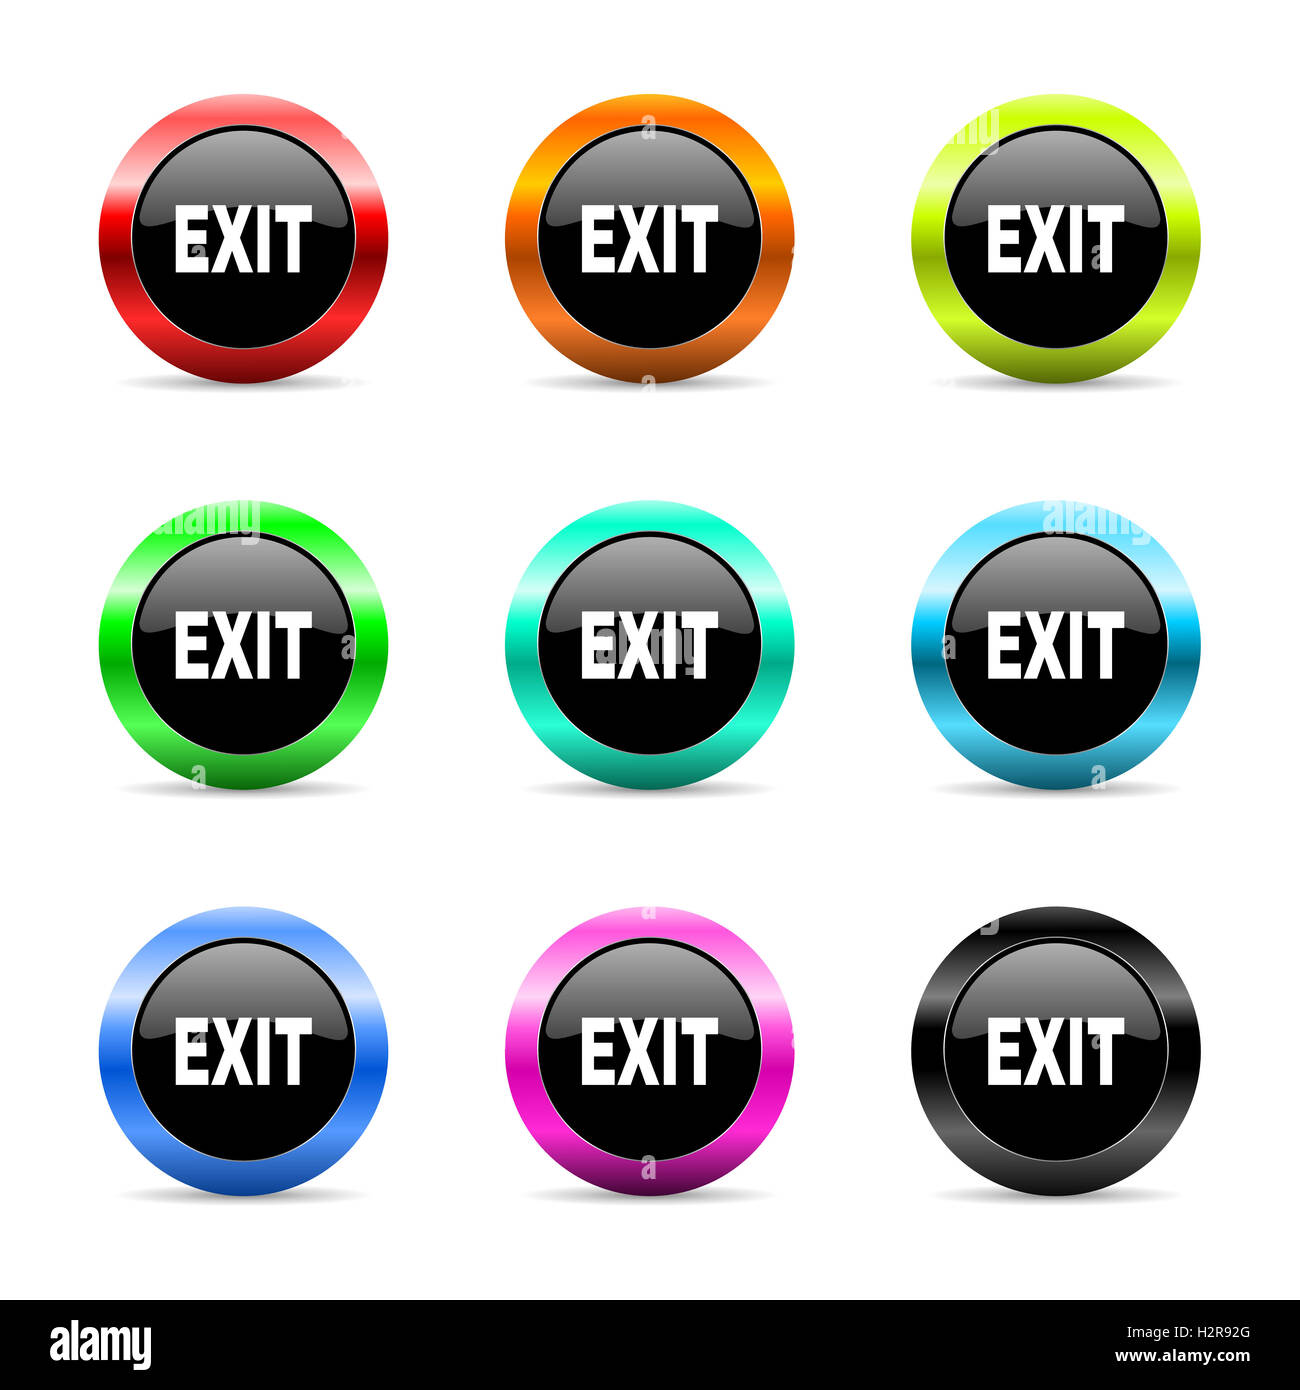 green emergency exit button to open door press here Stock Photo - Alamy